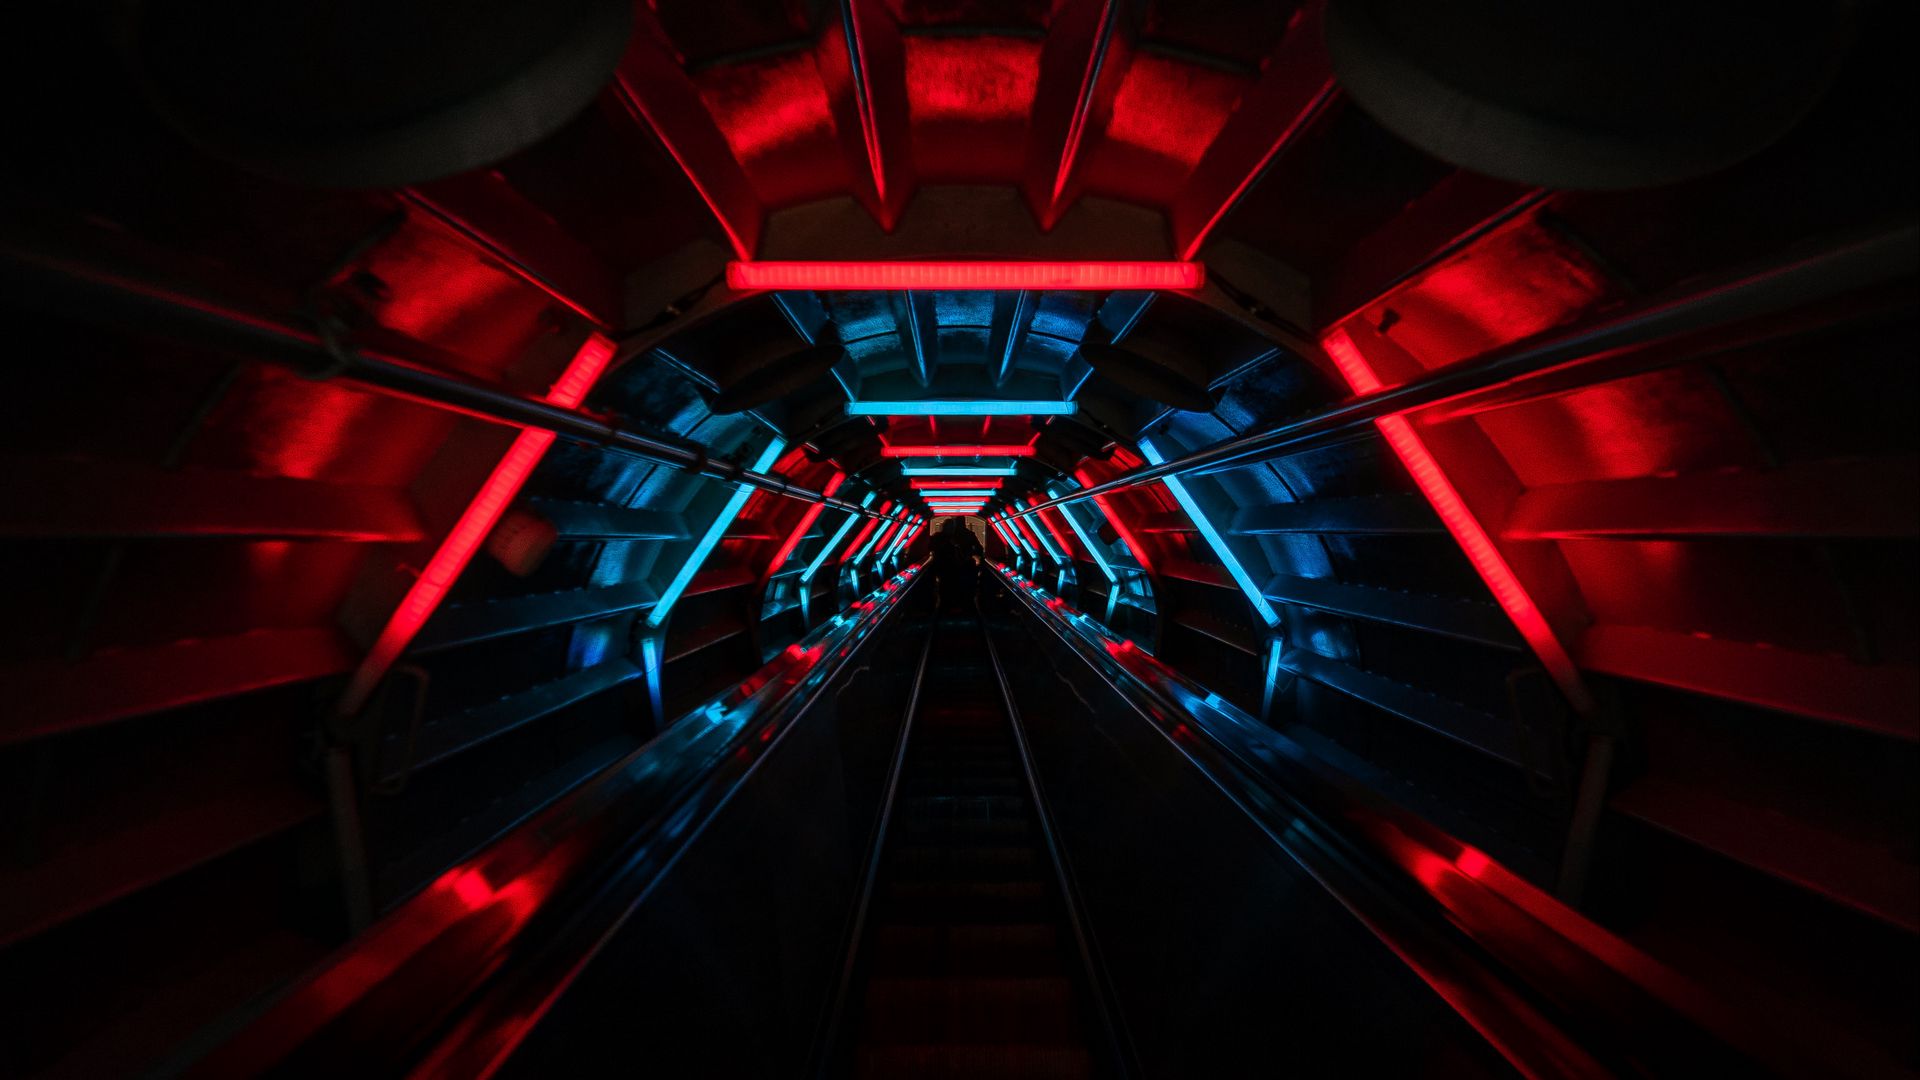 Glowing Hd Tunnel Wallpapers